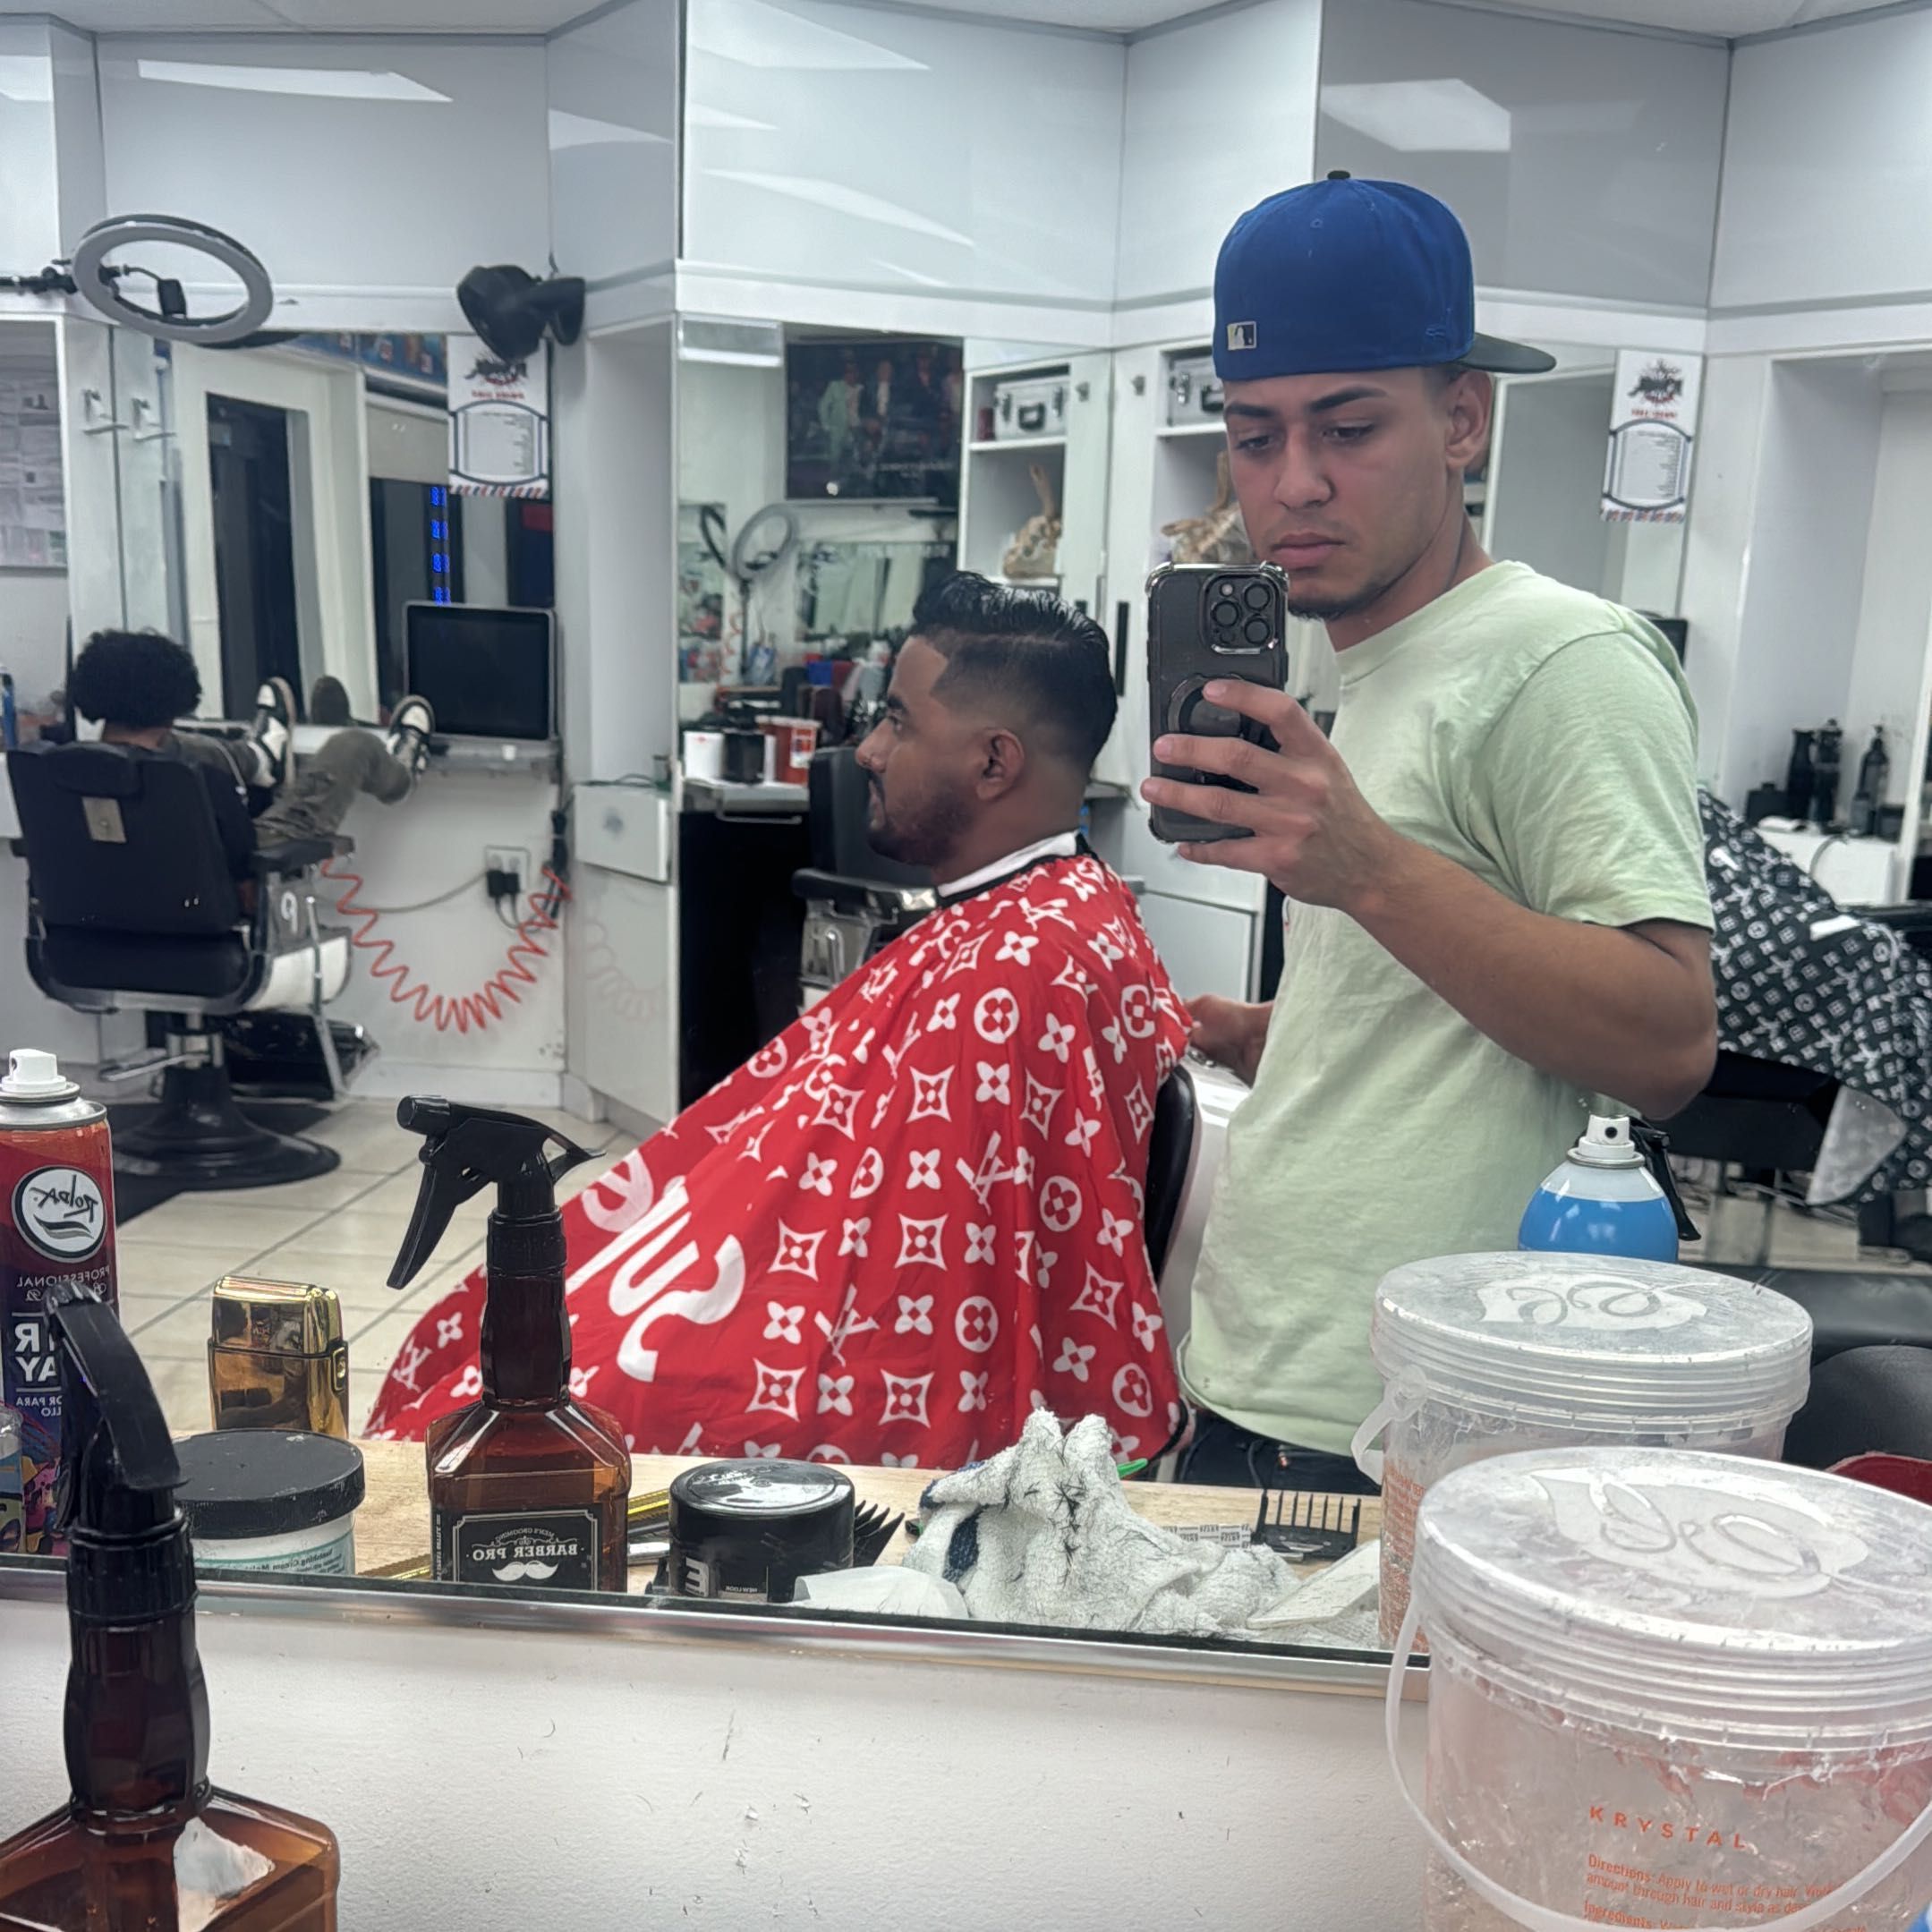 Power Barber Shop  My Name Is Oslin, 2951 NW 17th Ave, 2951 Nw 17th Ave My Name Is Oslin Barber Shop, Miami, 33142